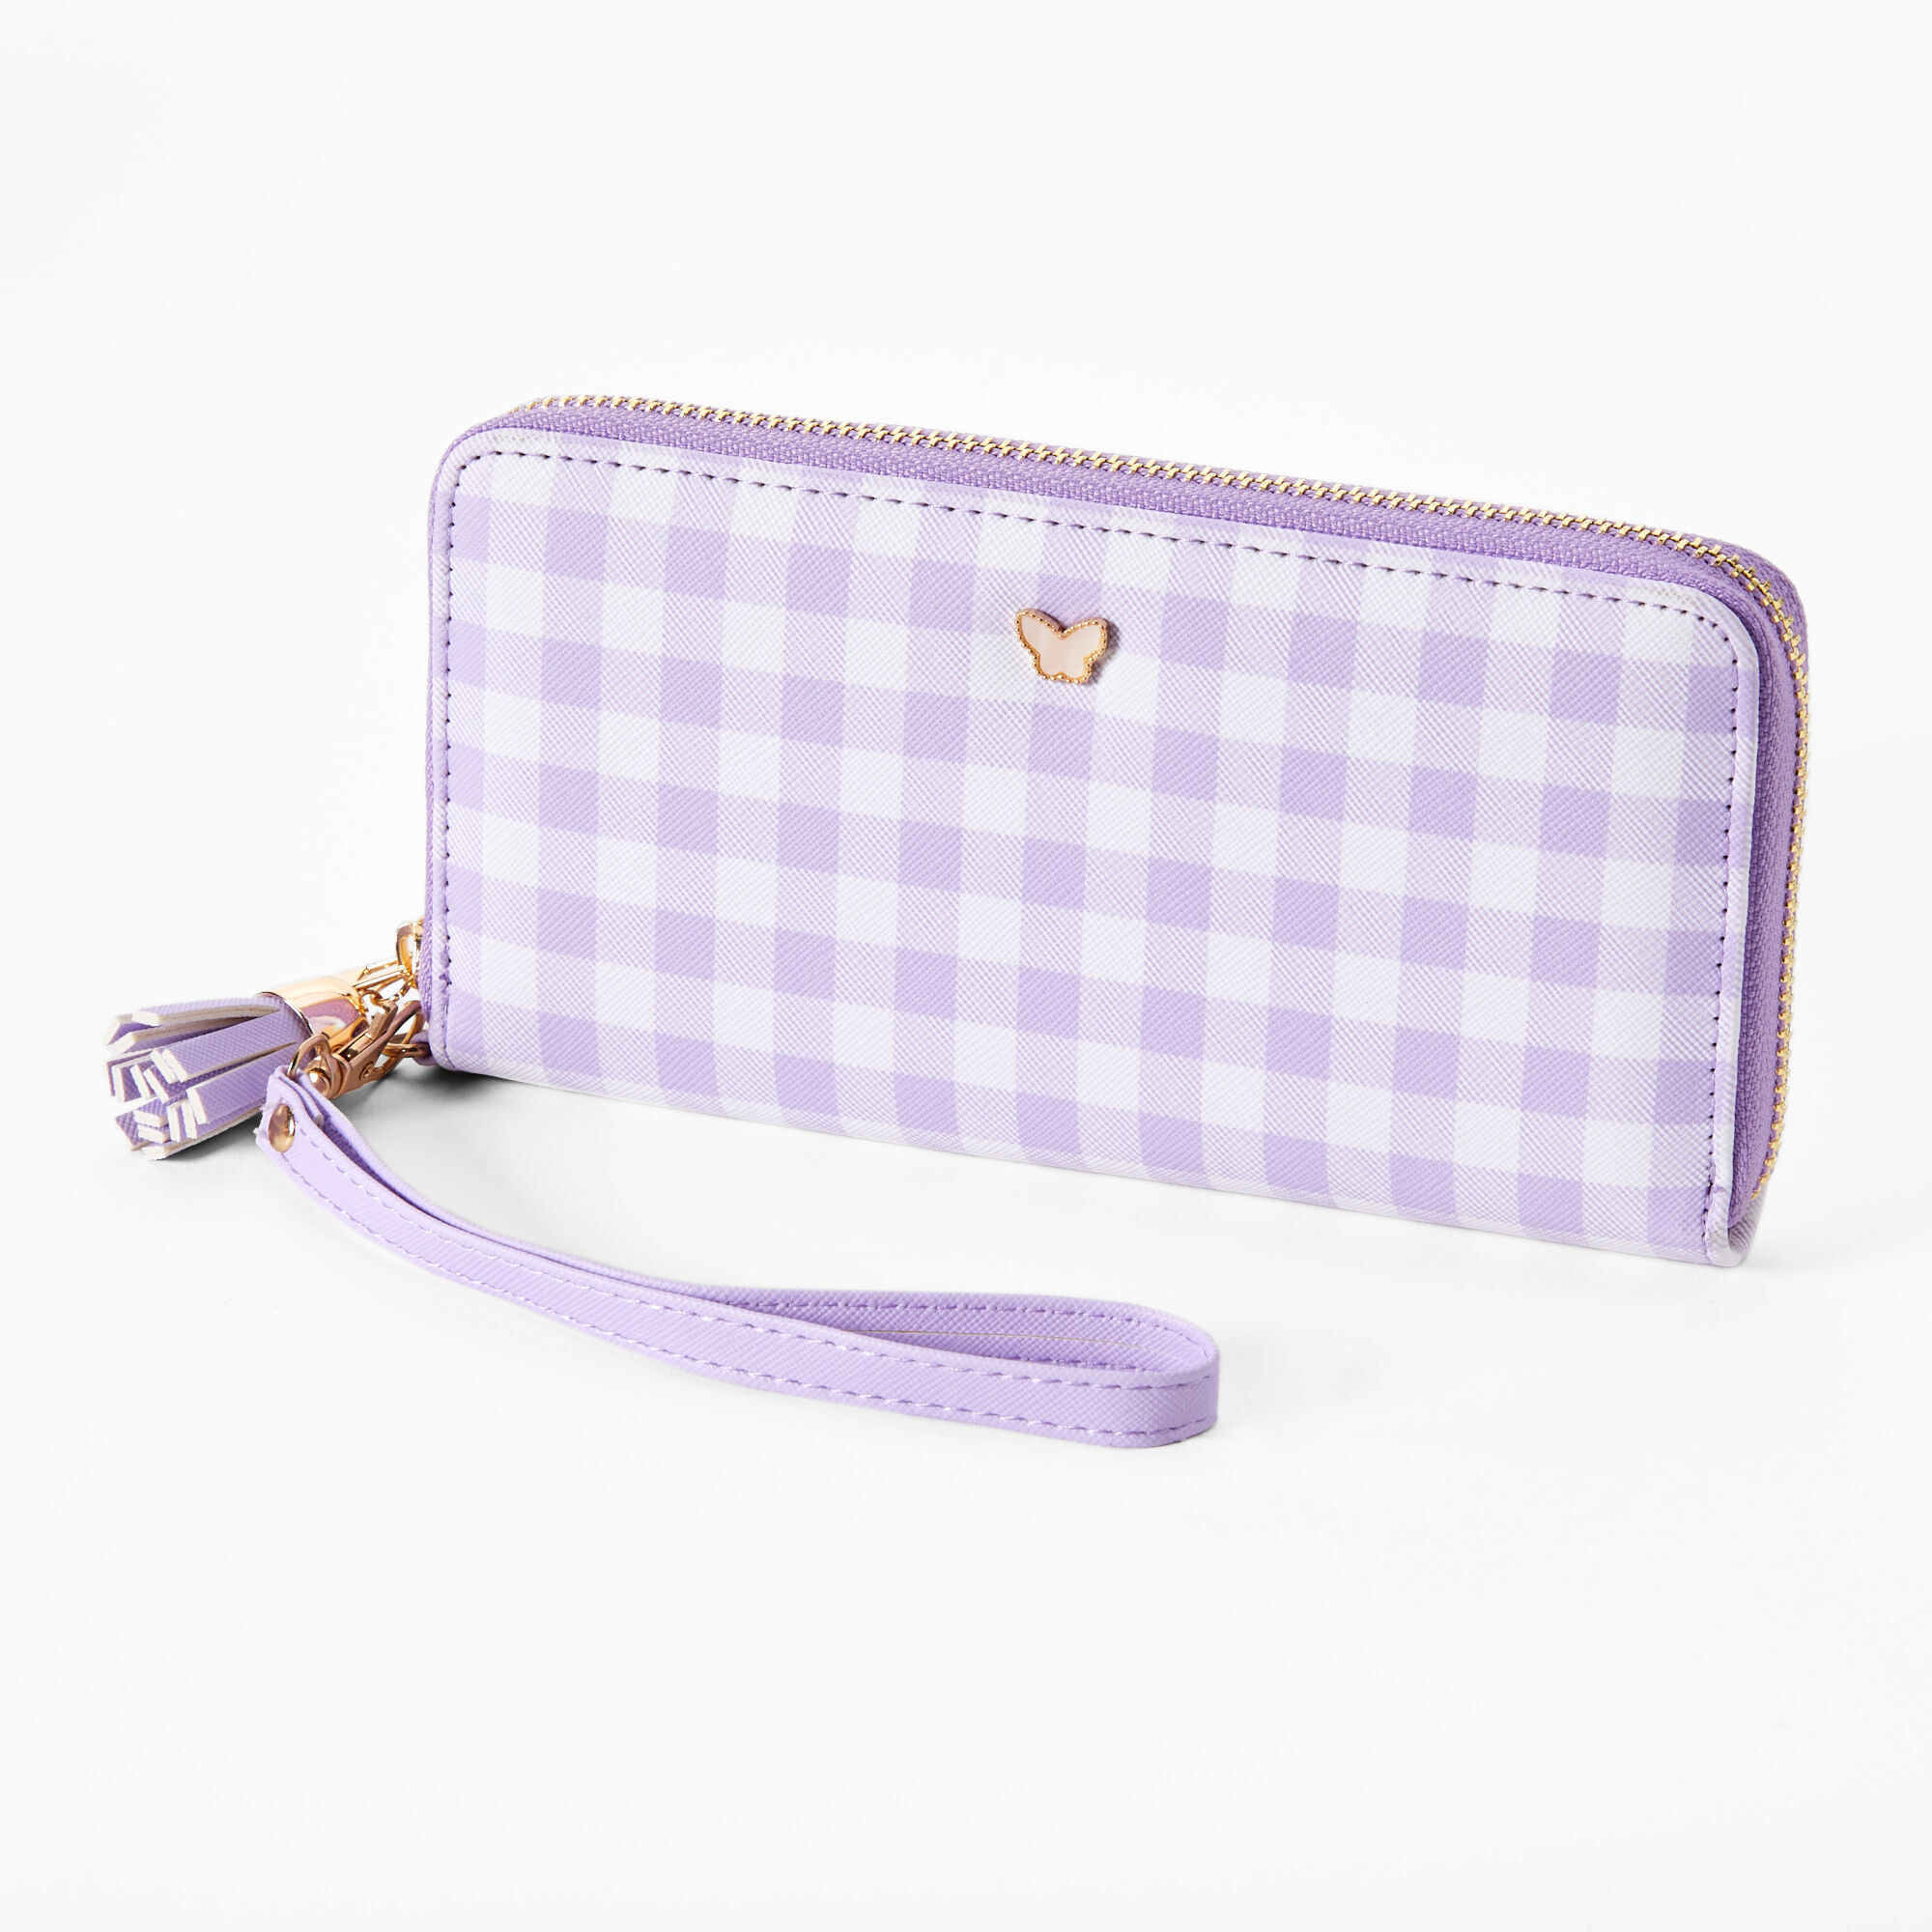 View Claires Lavender Gingham Butterfly Wristlet information